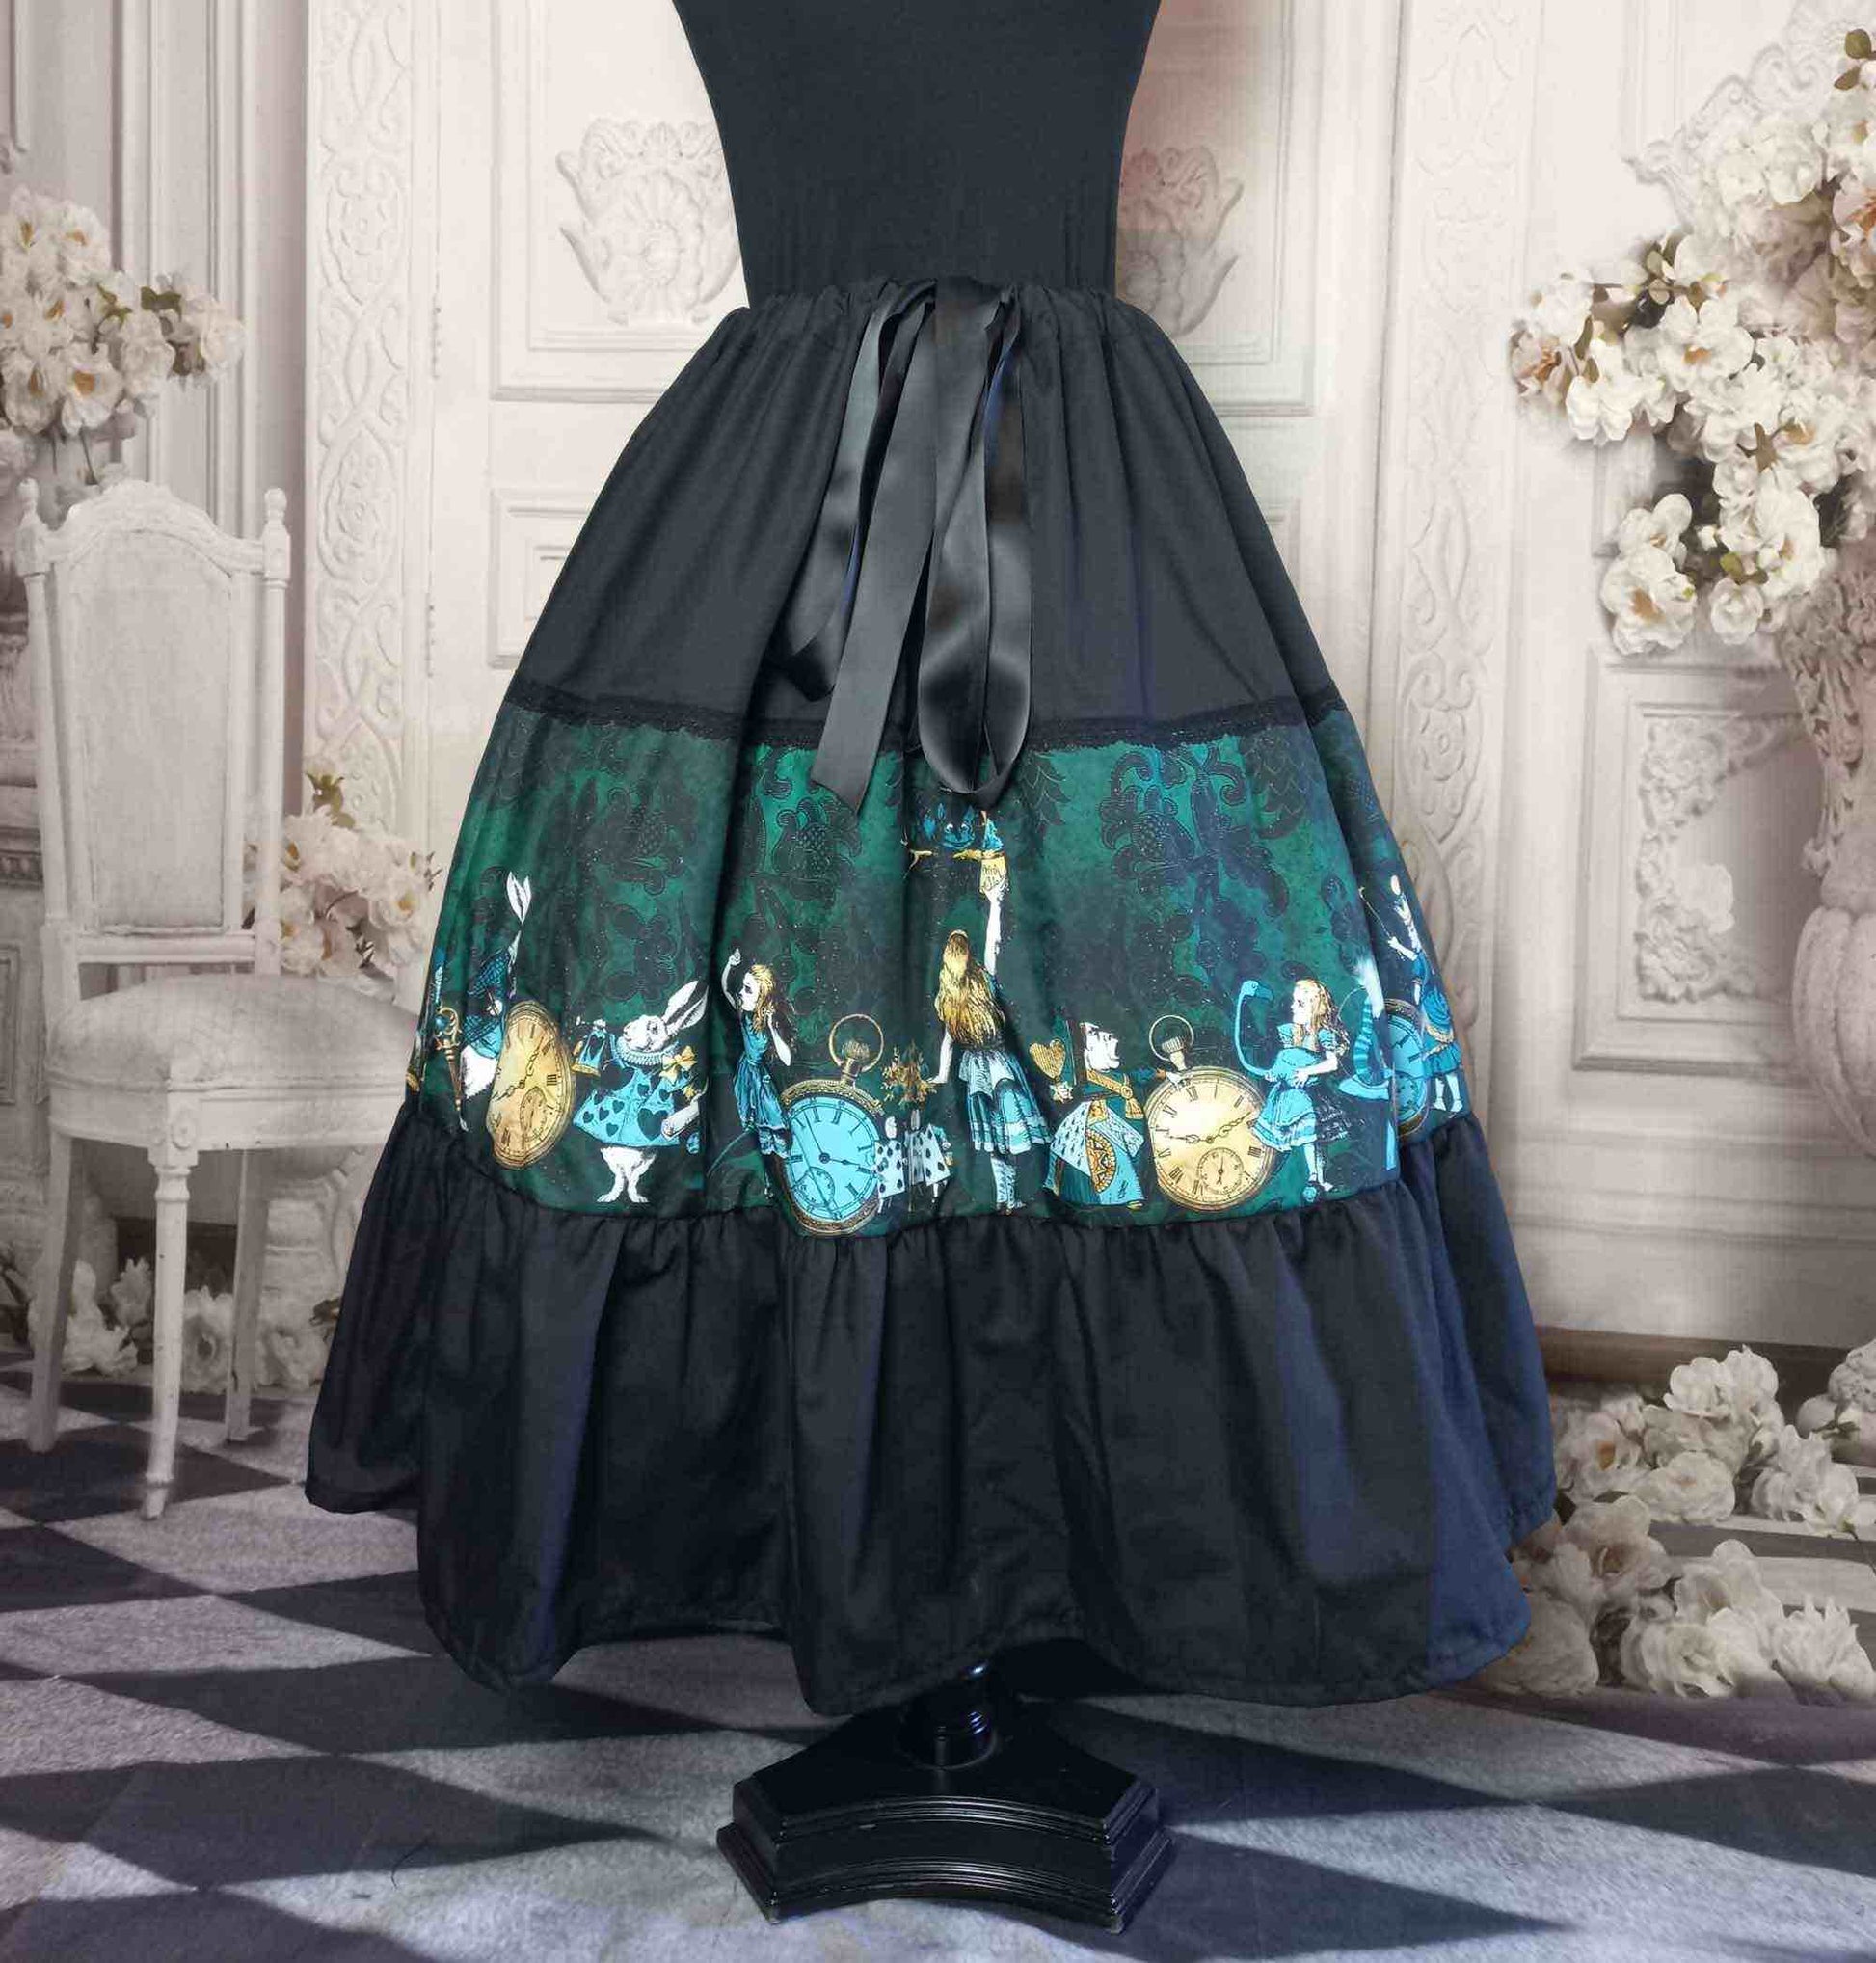 Alice in wonderland print tea length skirt in green and black featuring the characters of the story in aqua and gold